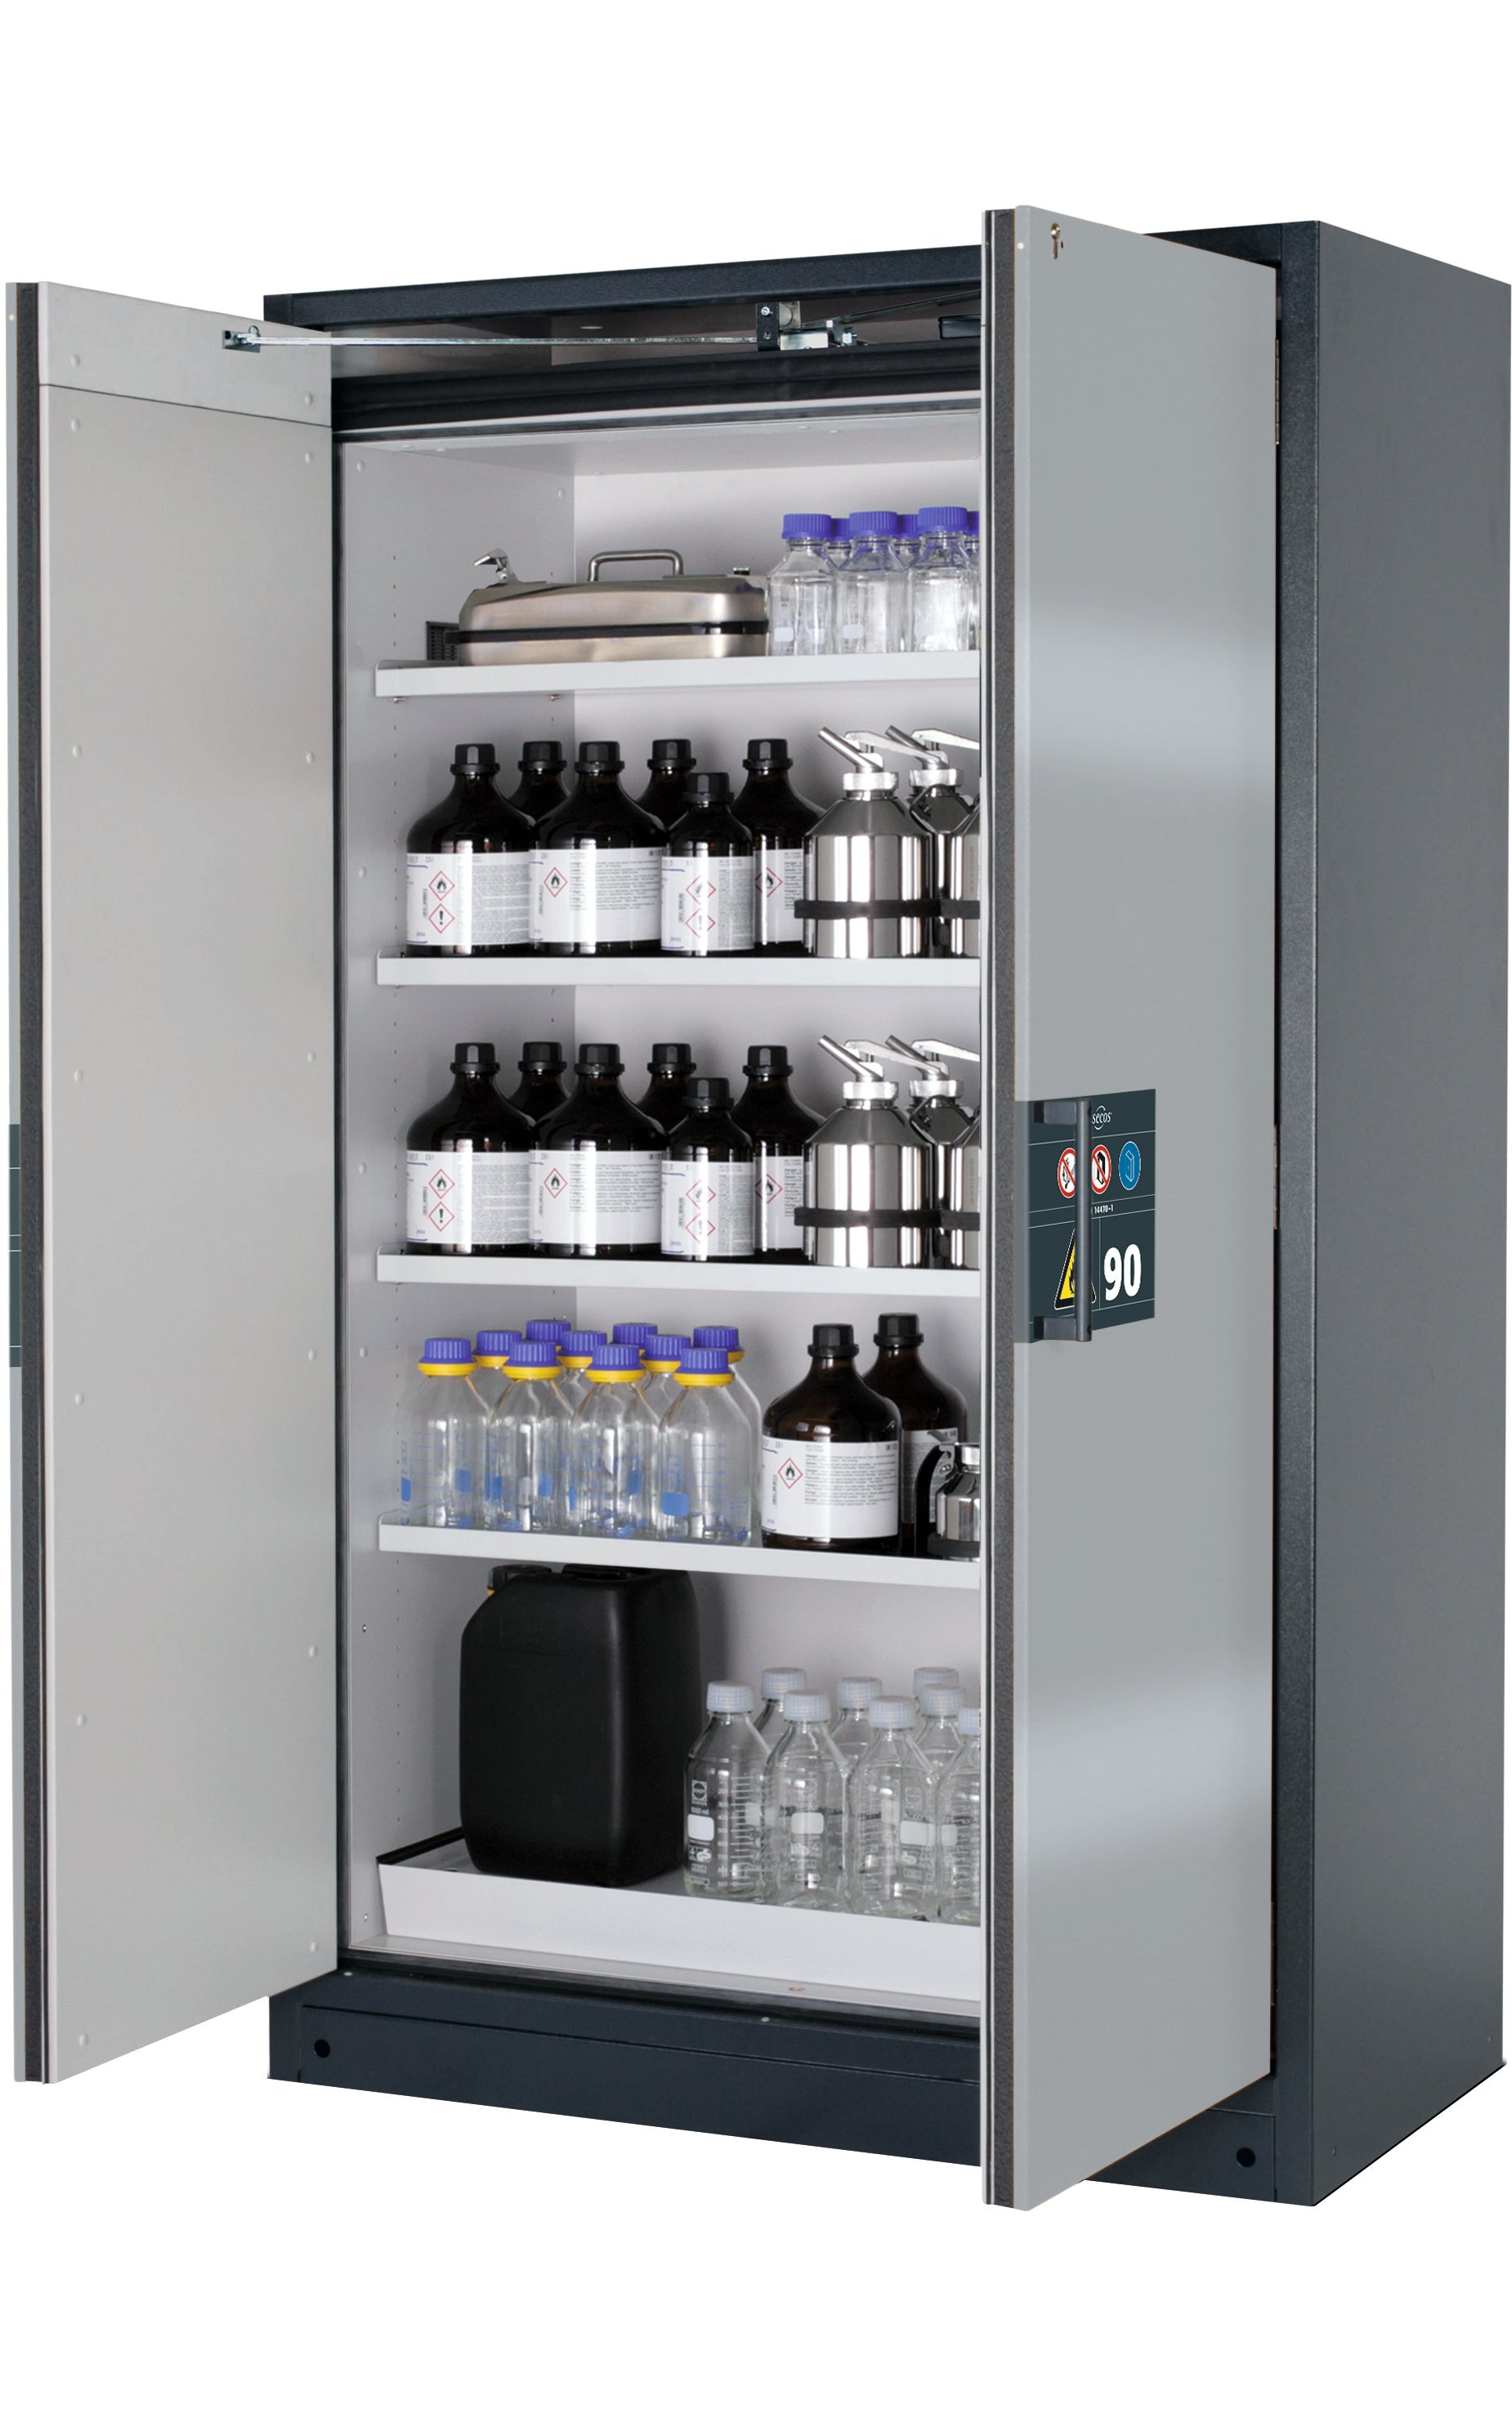 Type 90 safety storage cabinet Q-PEGASUS-90 model Q90.195.120.WDAC in asecos silver with 4x shelf standard (sheet steel),